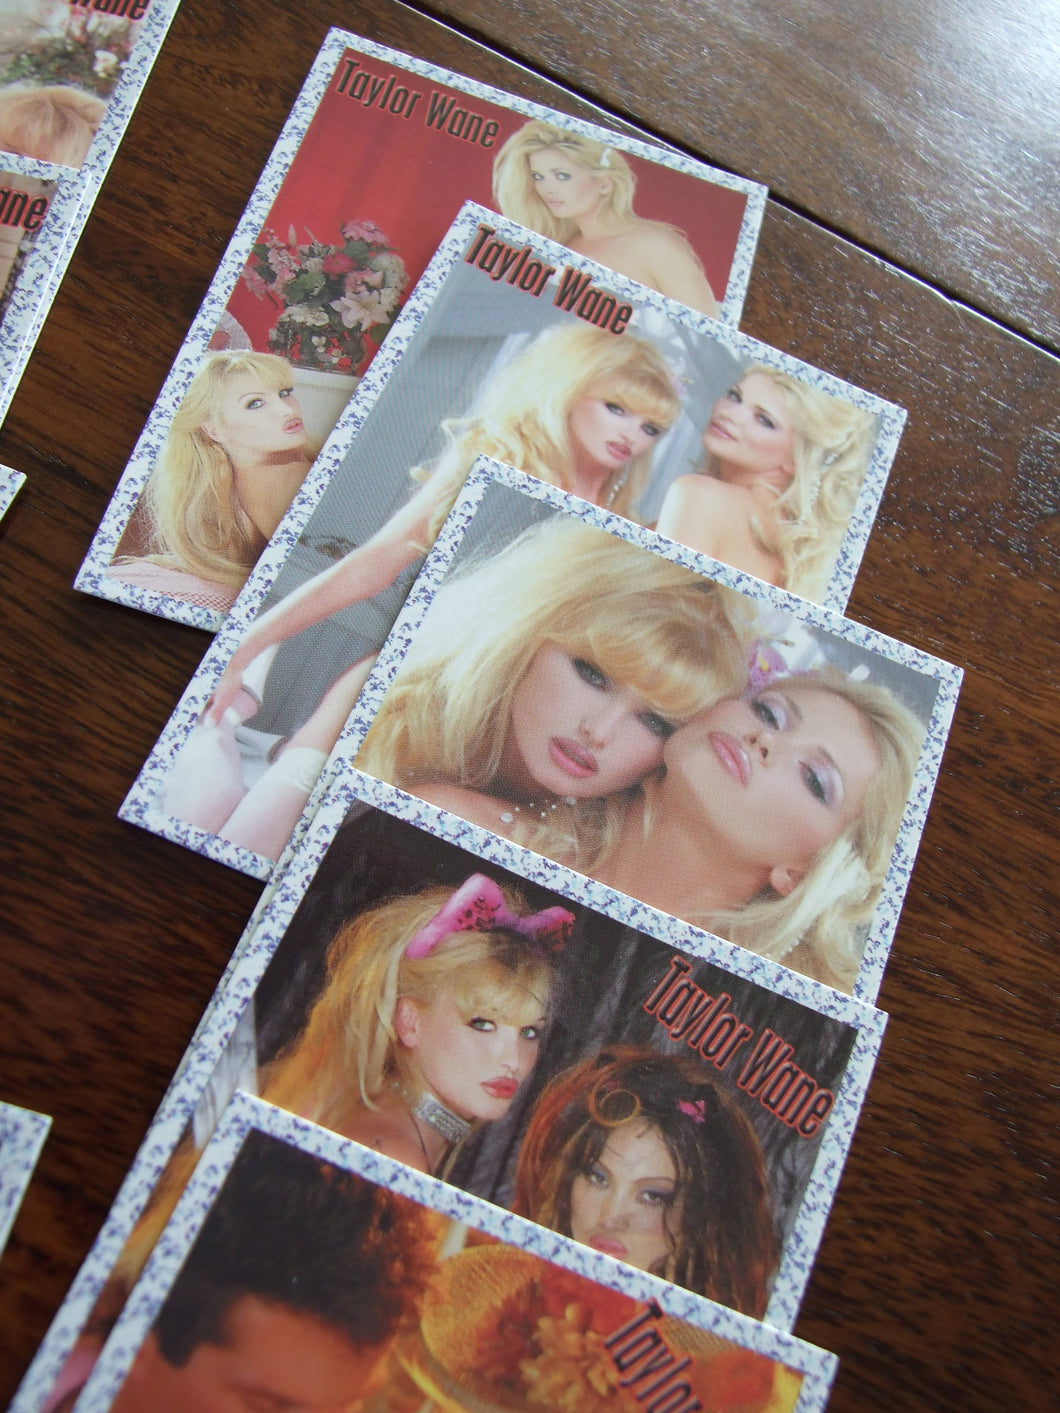 Taylor Wane & Friends Complete Basic Trading Card Set (36)